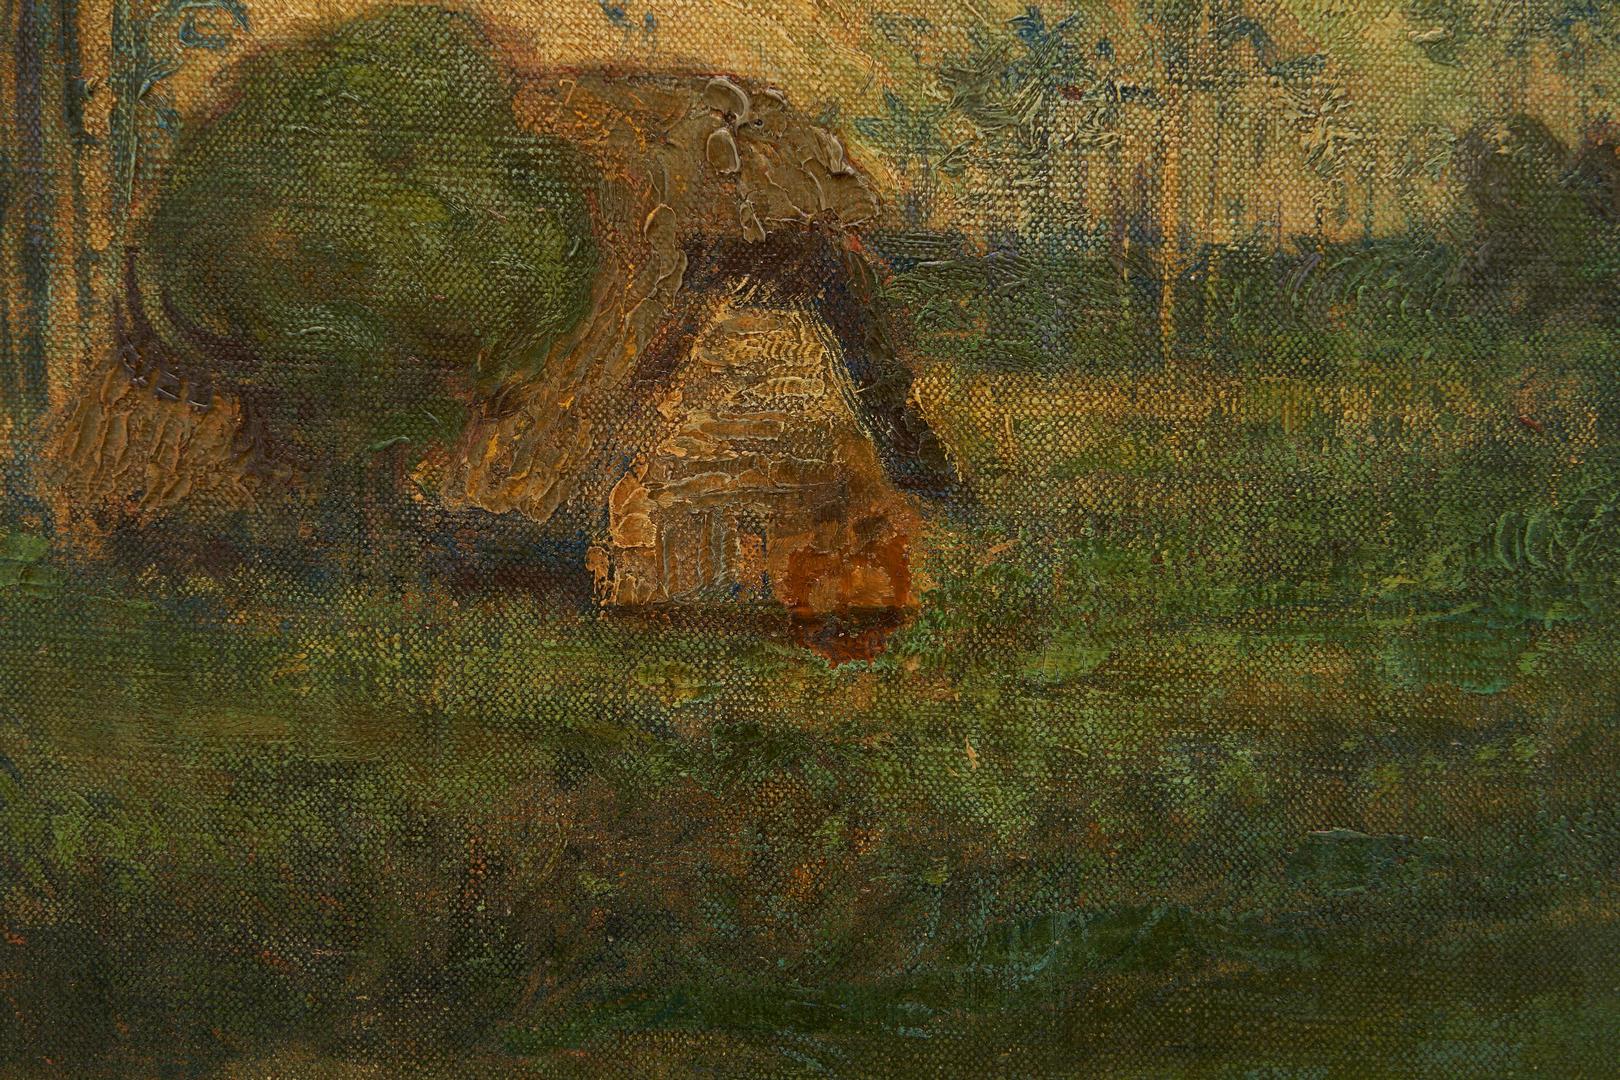 Lot 189: Theodore Wores Oil on Canvas, Samoan Landscape c. 1901